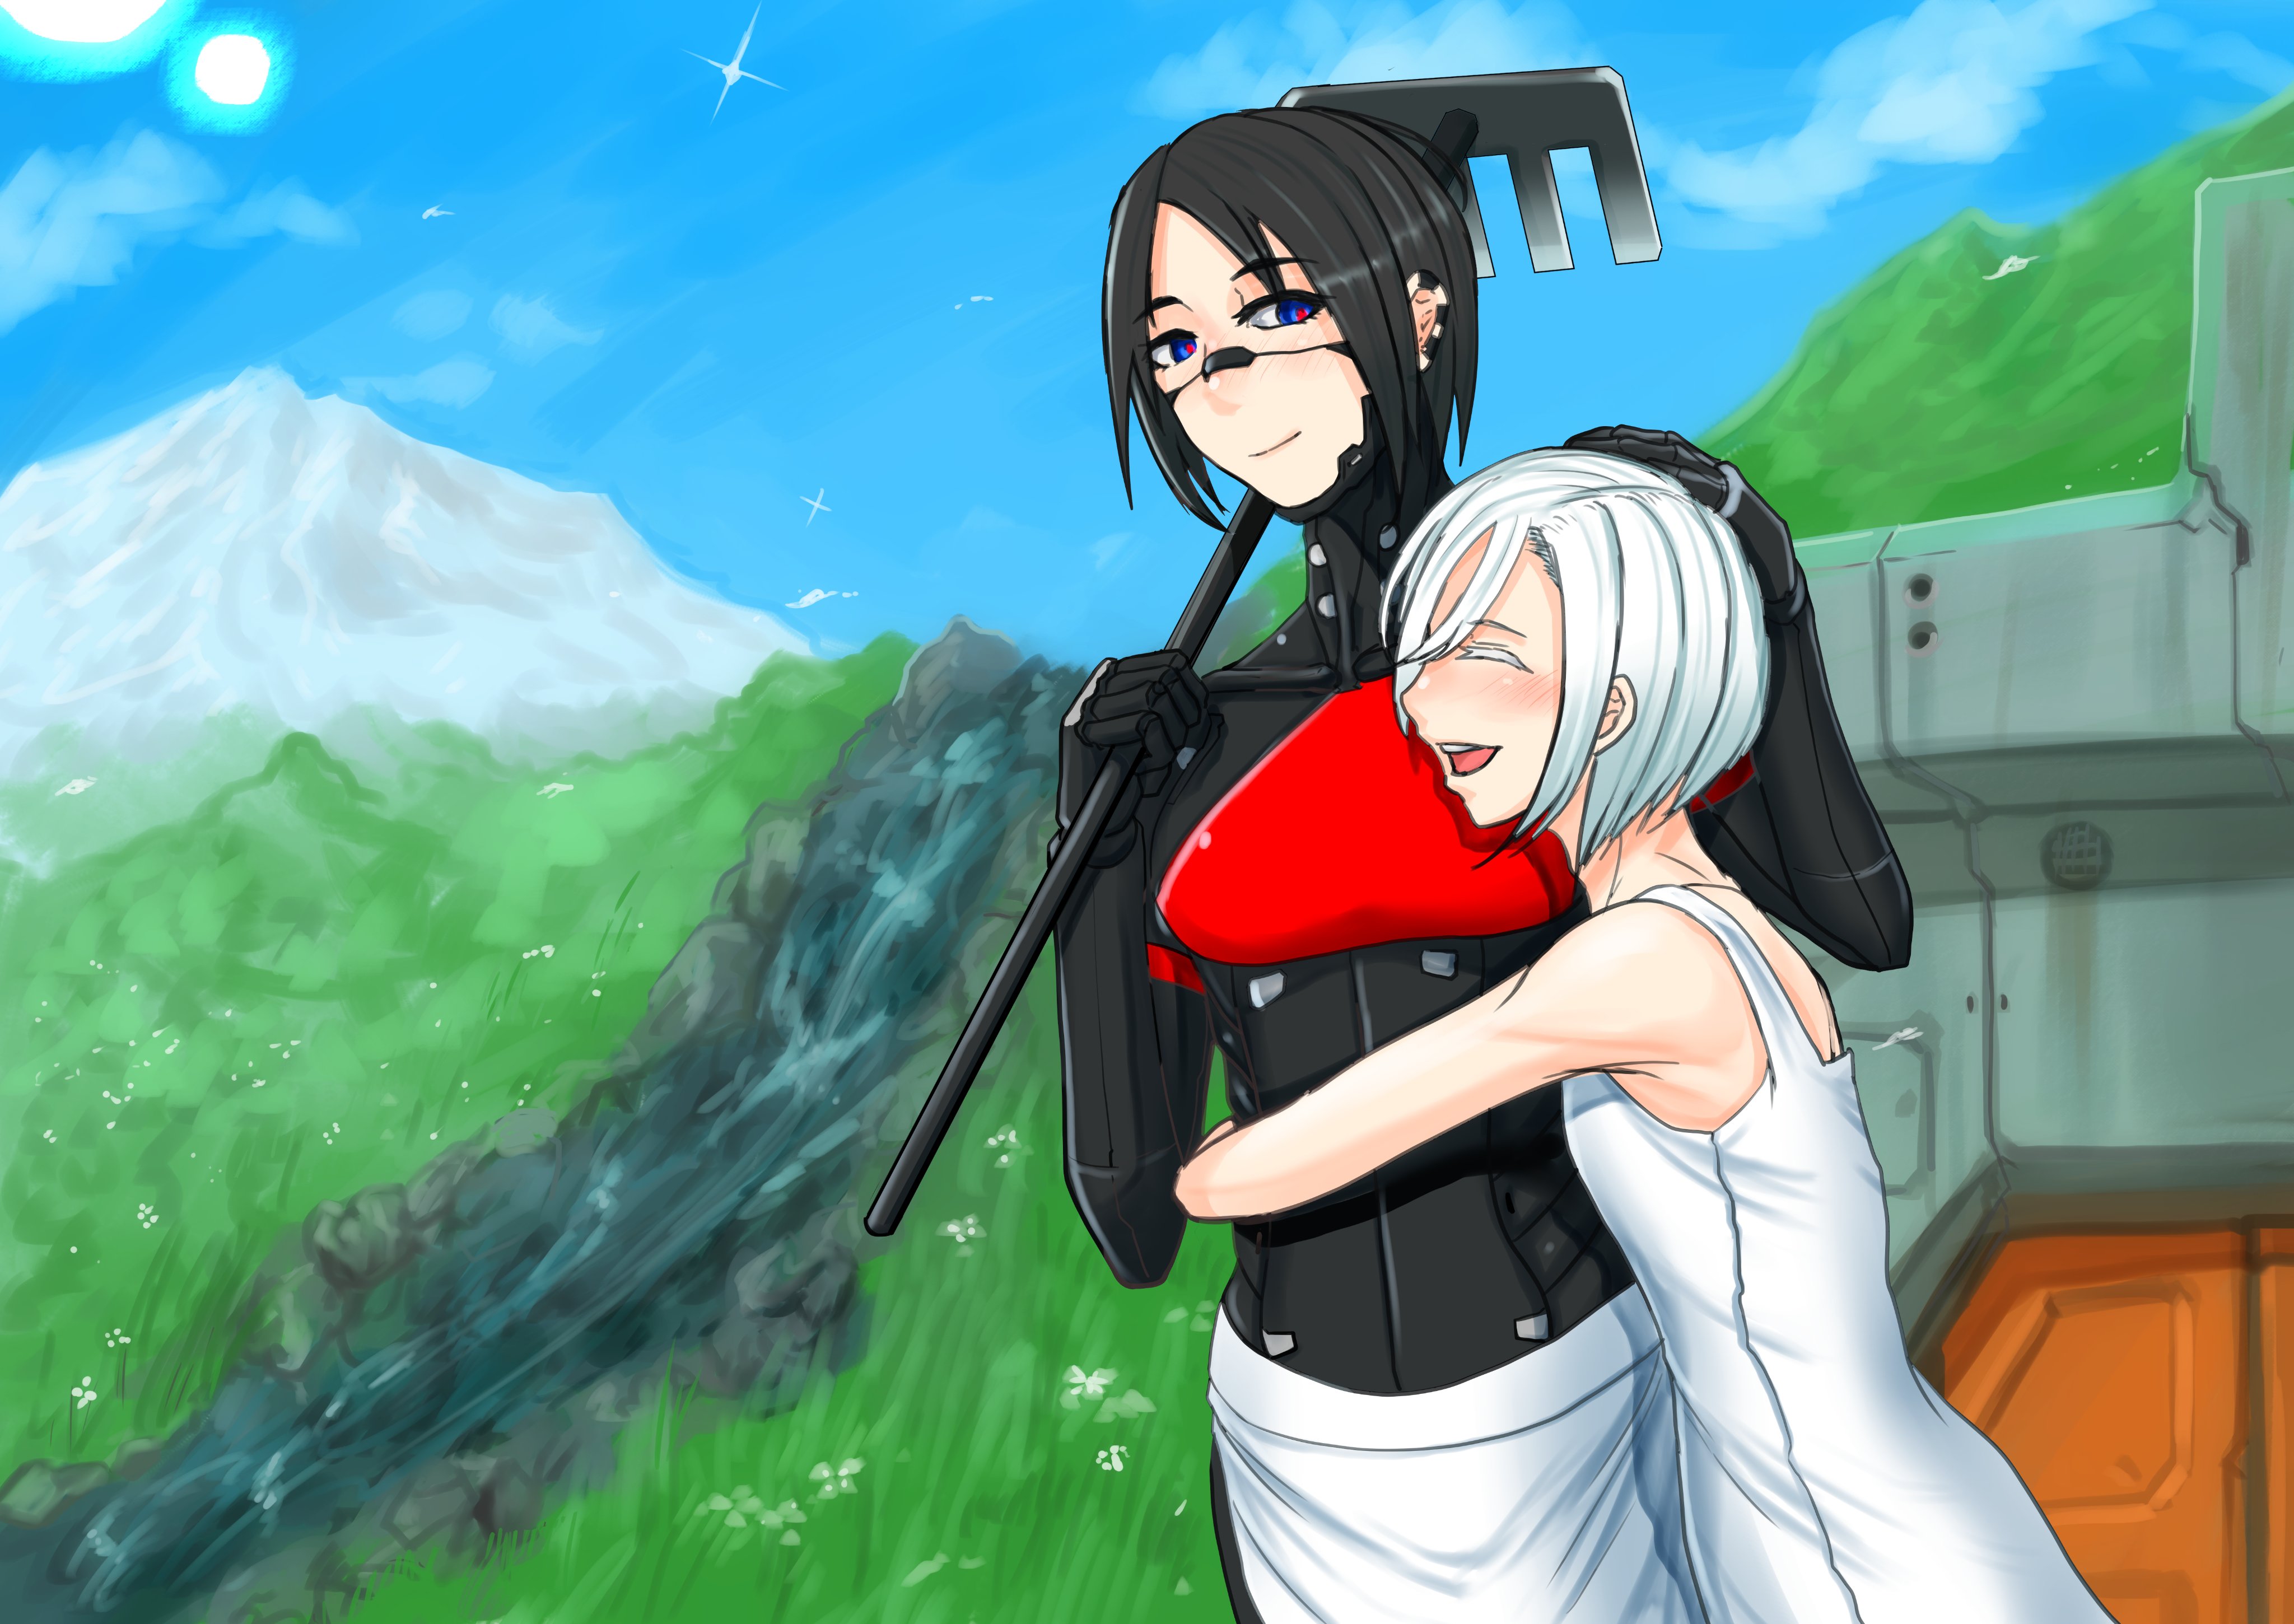 Anime 4096x2900 signalis anime girls science fiction androids robot smiling mountains hugging short hair